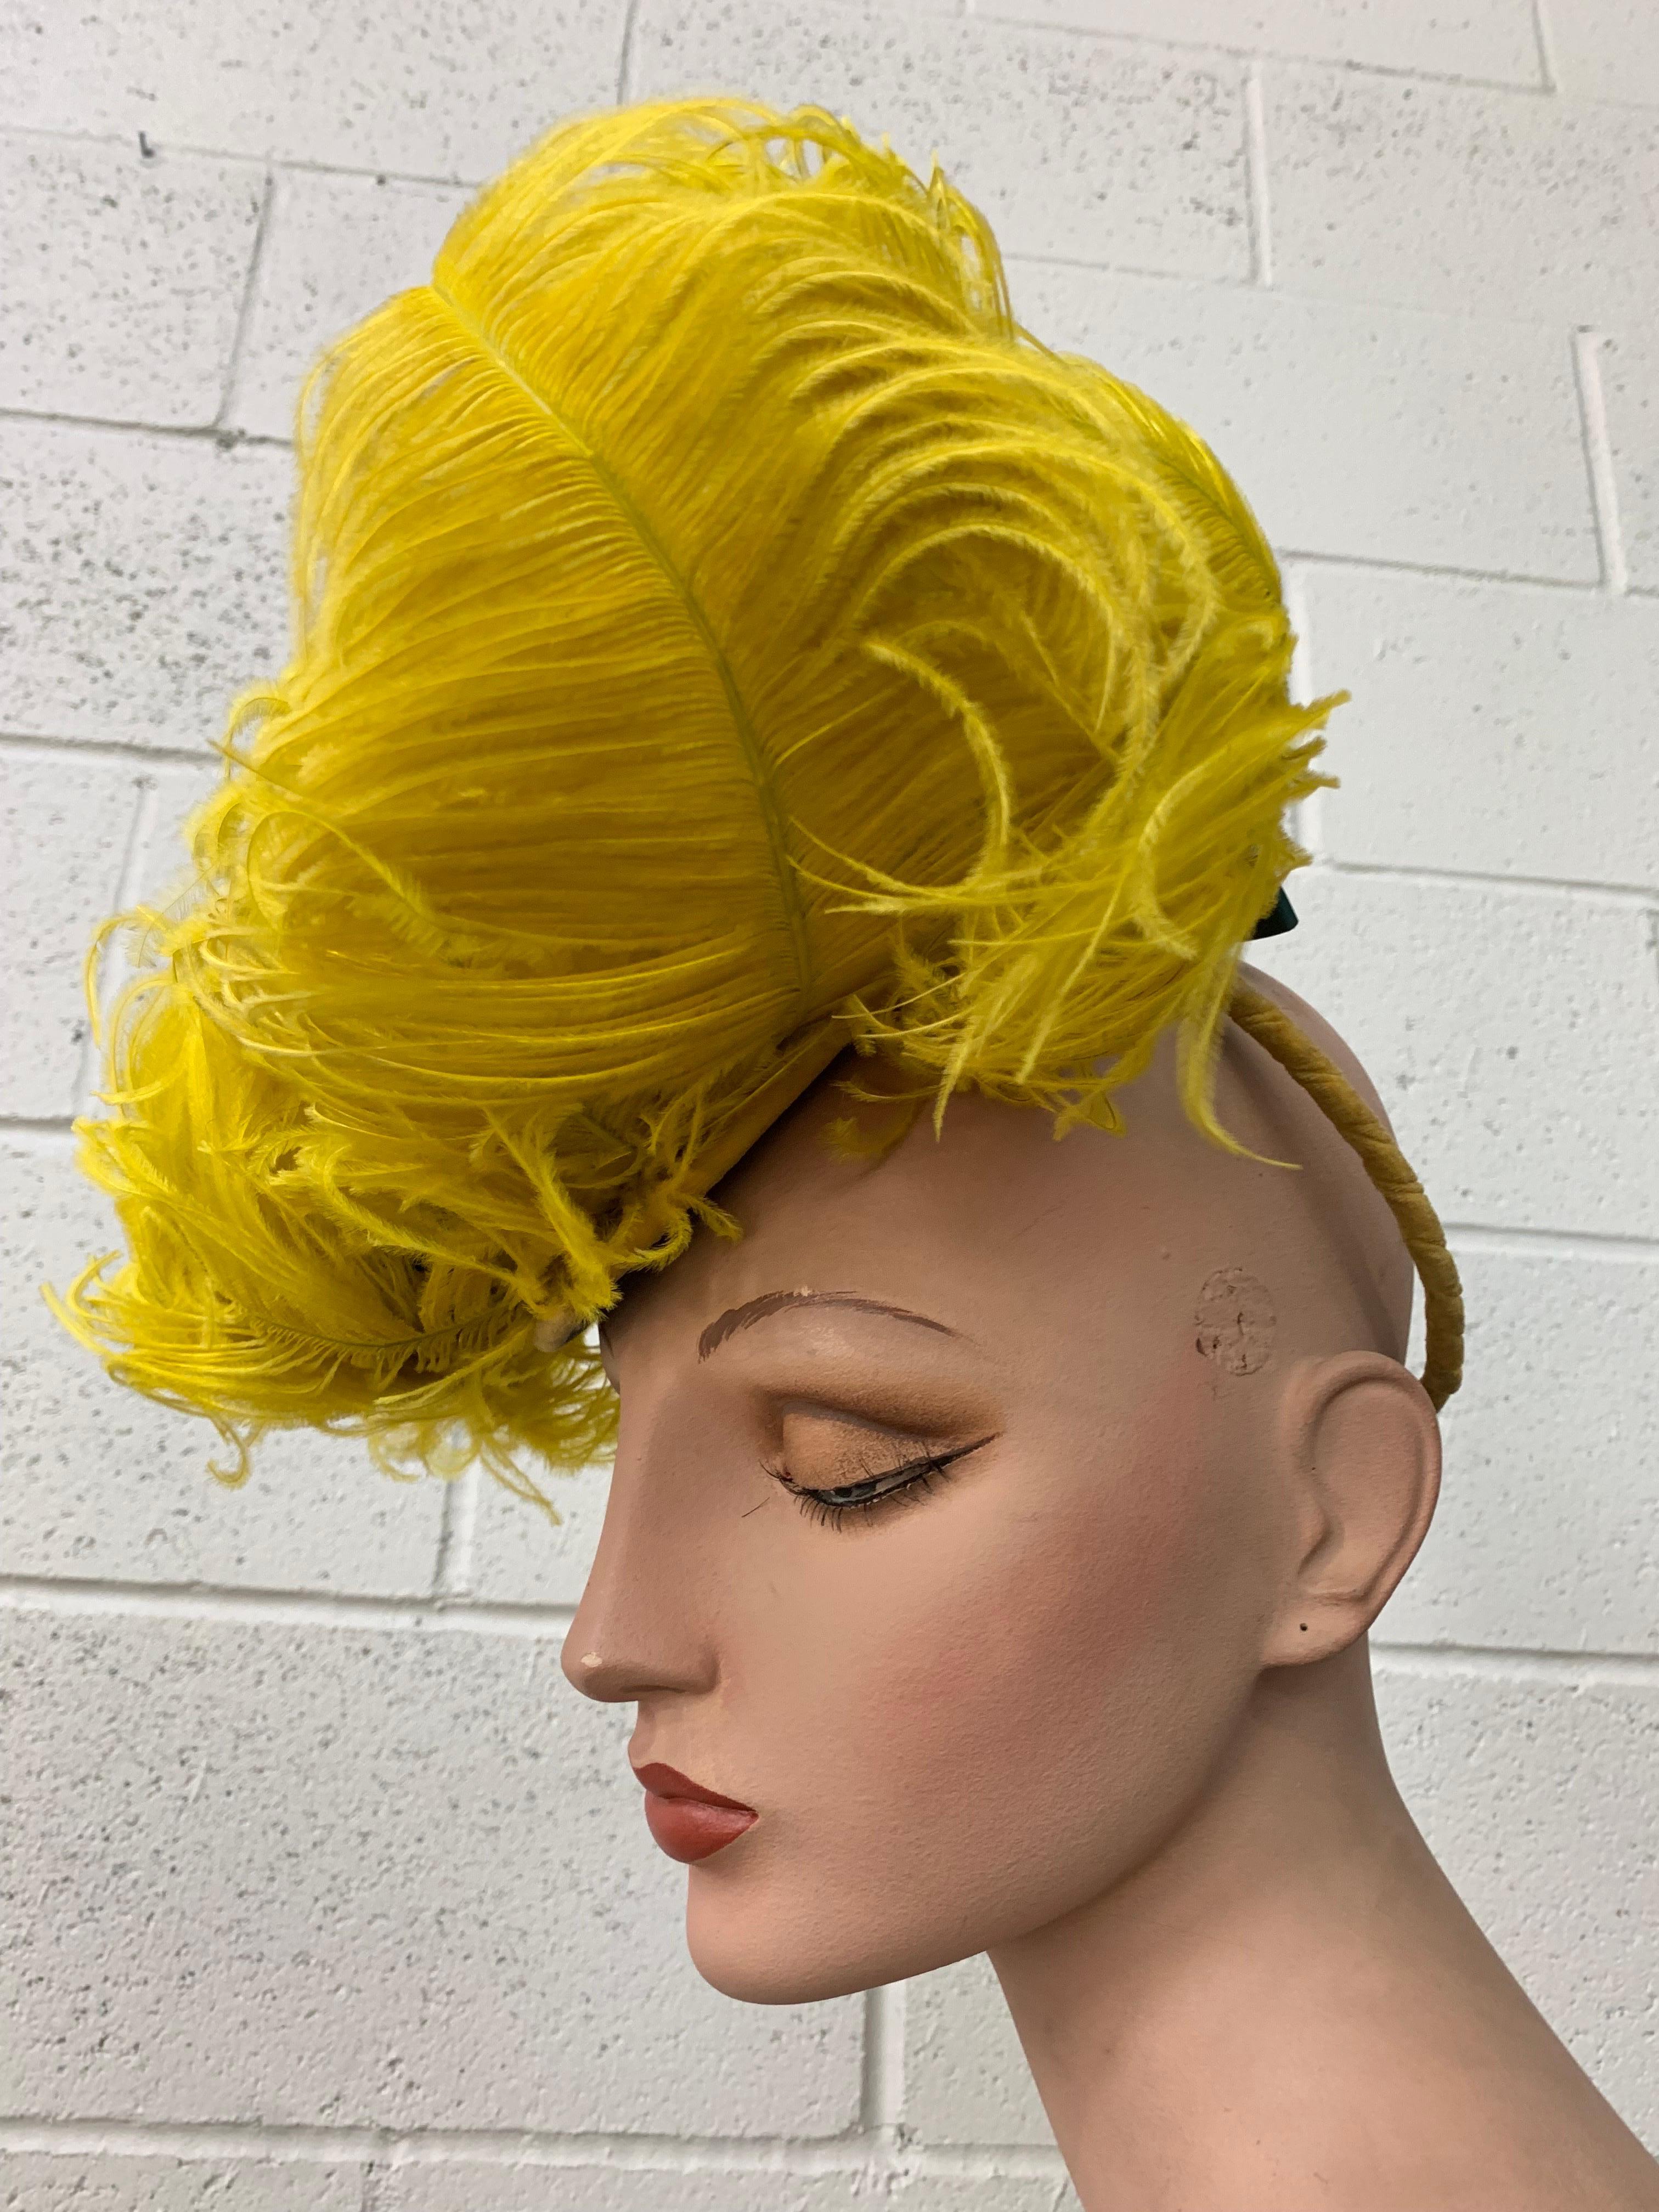 Spectacular 1940s Chartreause Ostrich Feather Perching Doll Hat Fascinator:  High 40s style is yours in this extravagantly unusual custom made hat!  No makers label but this bold color statement is an instantly iconic look! A cloud of ostrich